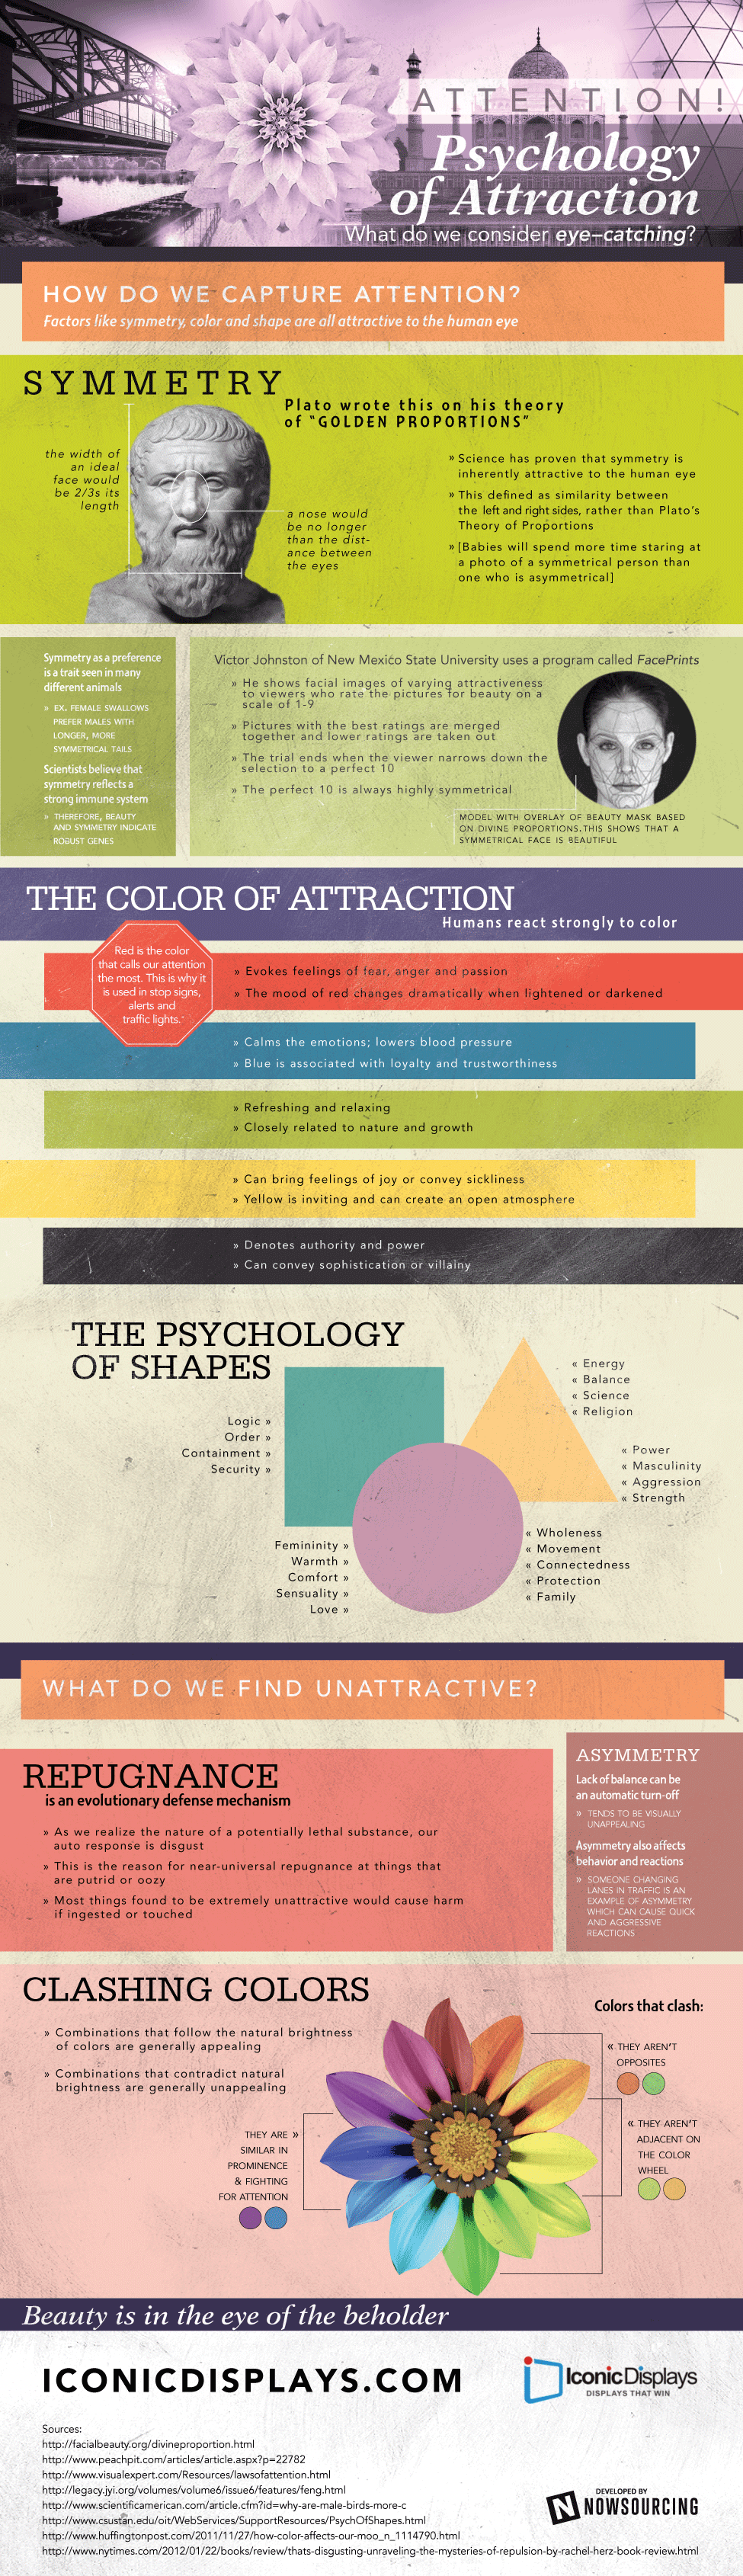 psychology-of-attraction-infographic